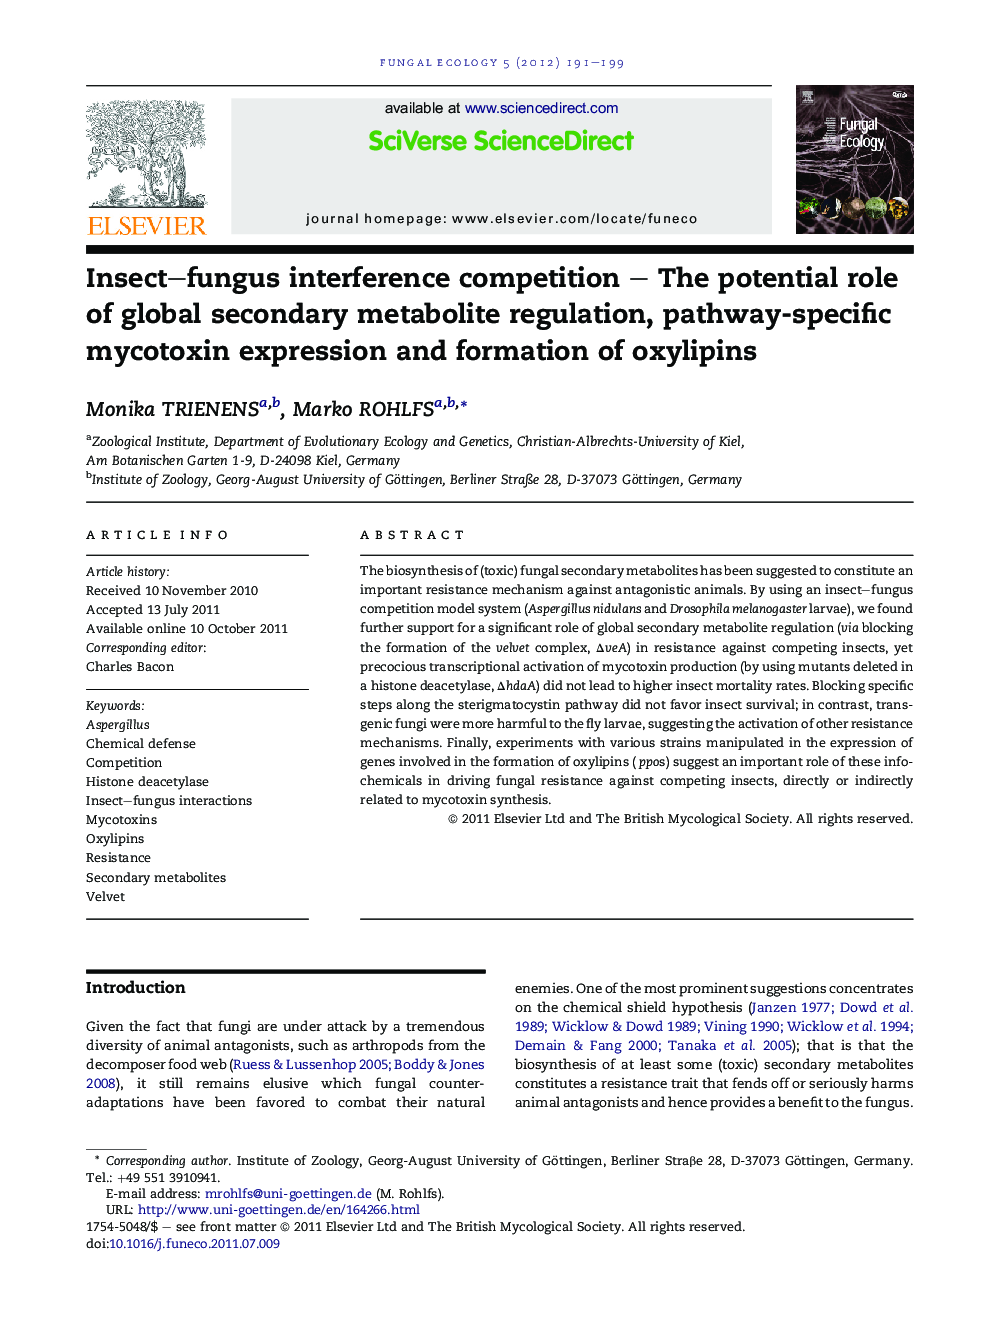 Insect-fungus interference competition - The potential role of global secondary metabolite regulation, pathway-specific mycotoxin expression and formation of oxylipins